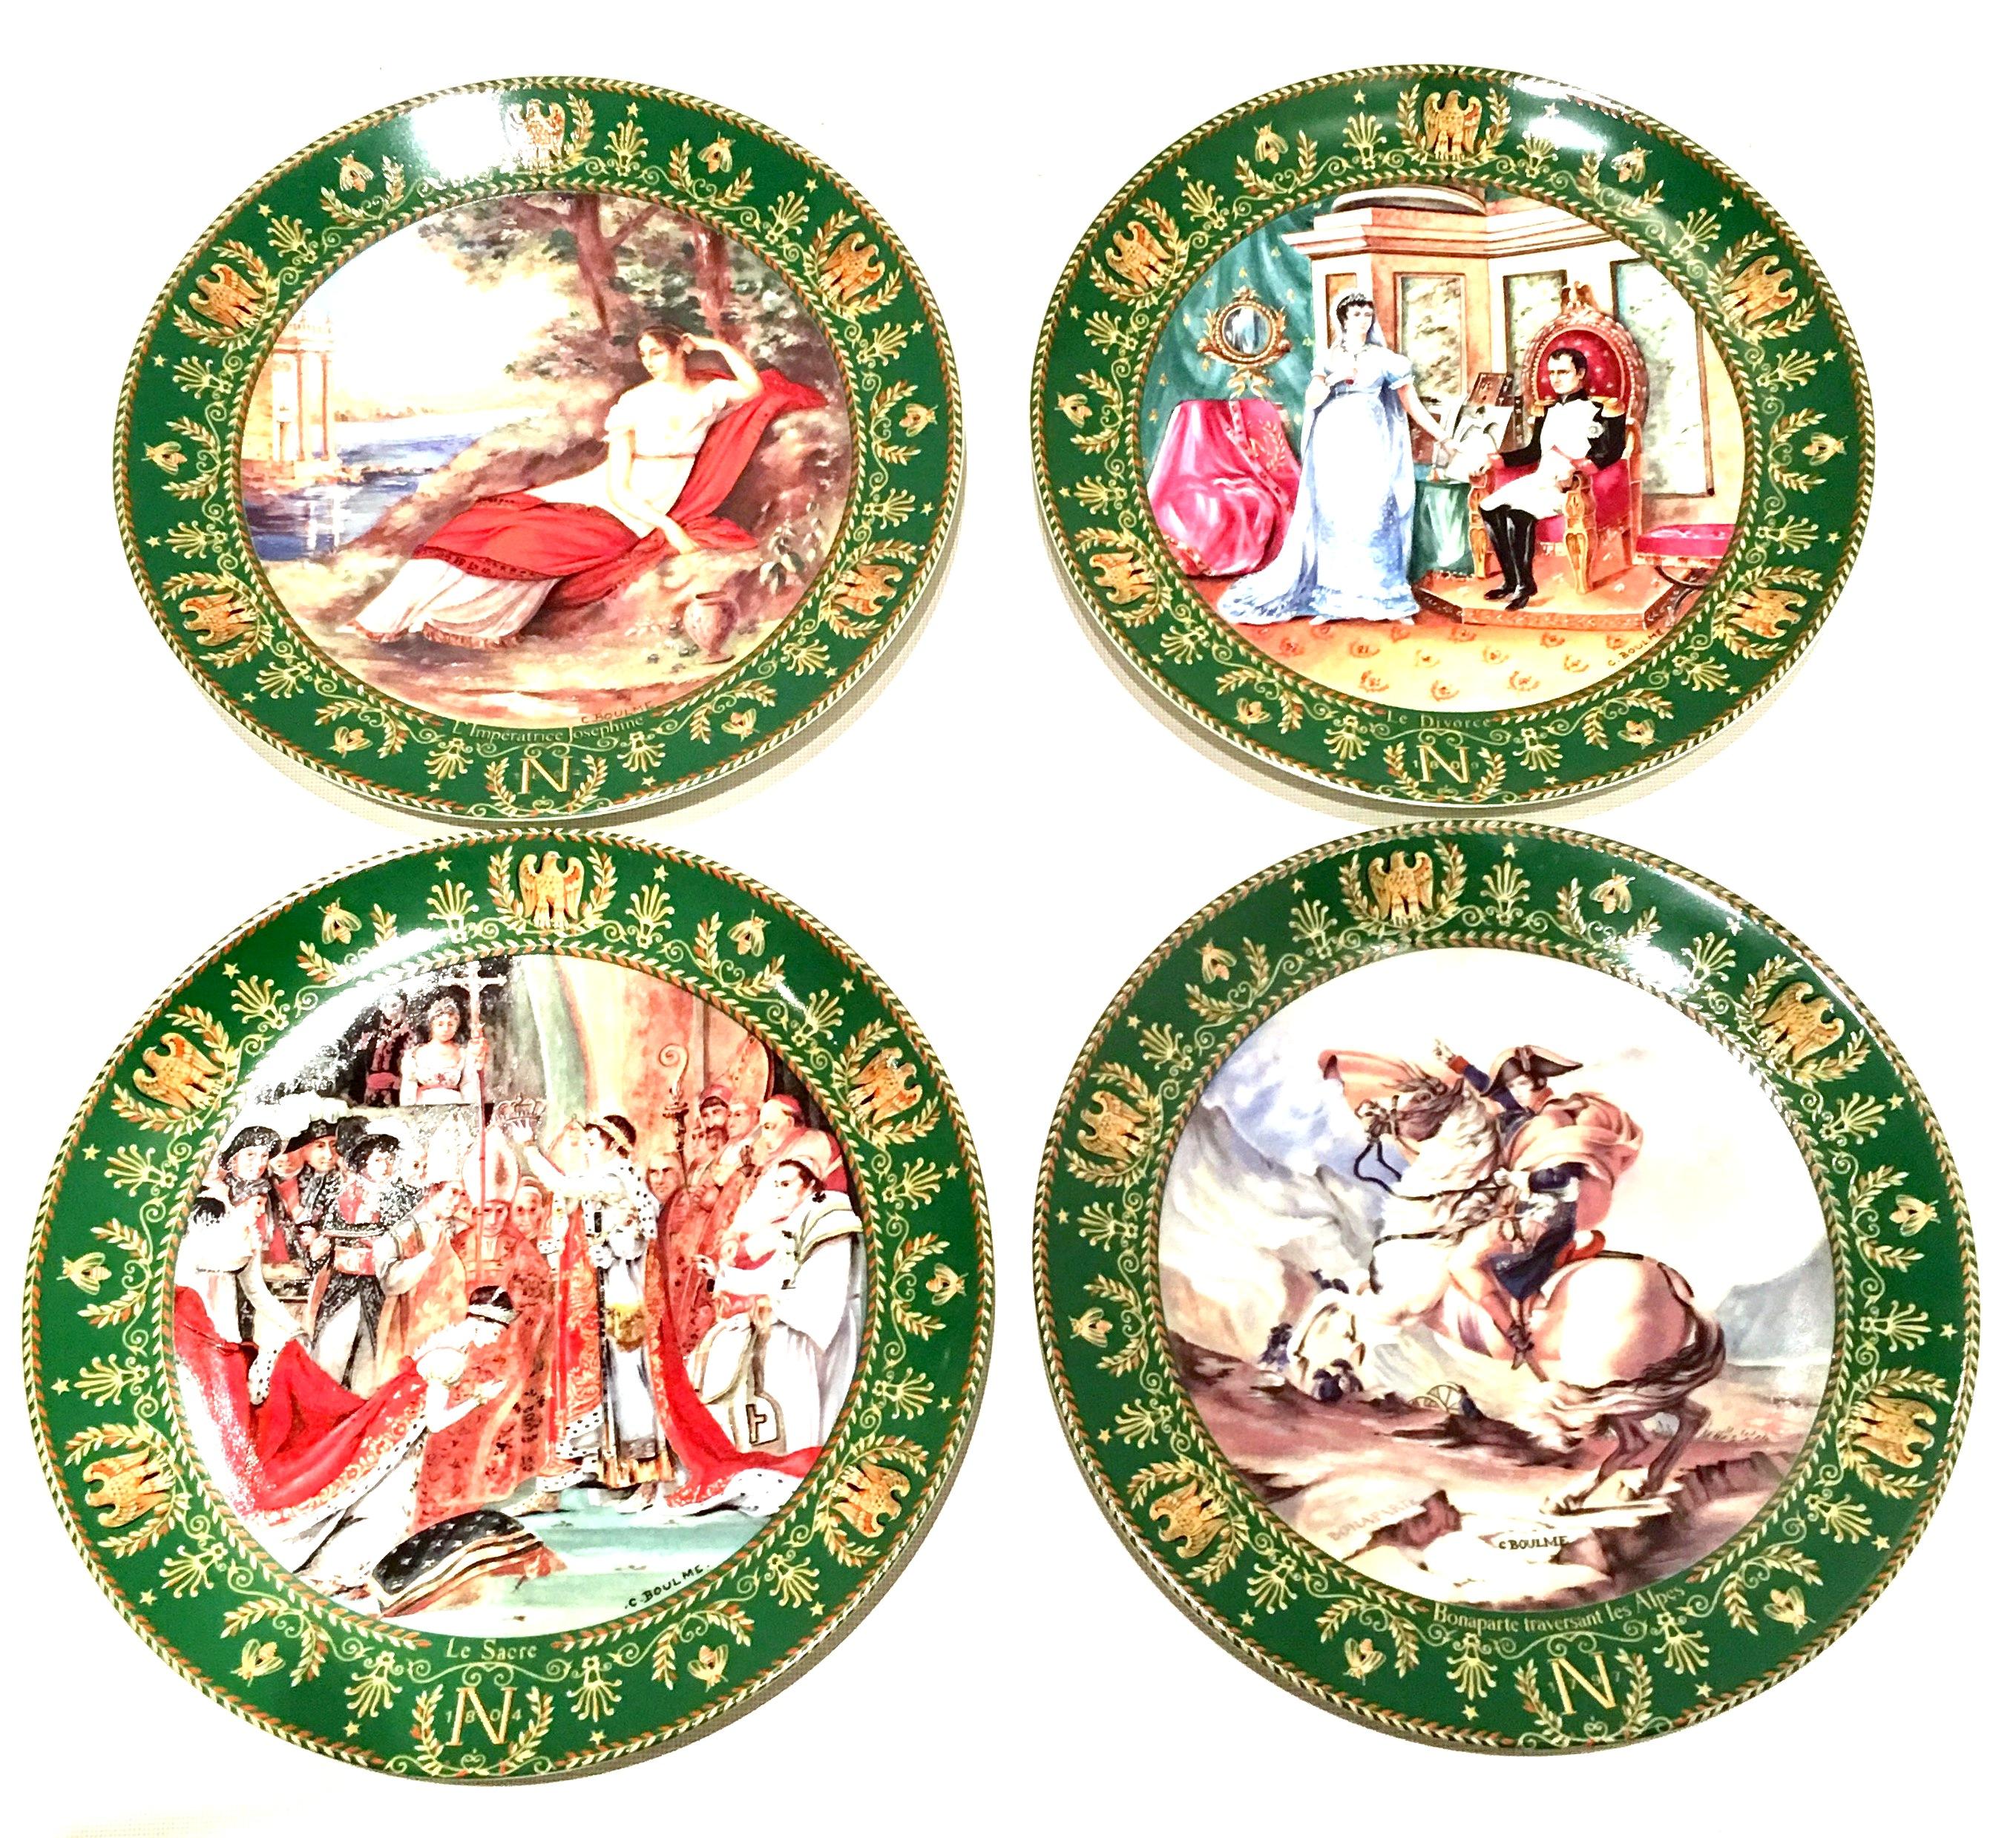 1980'S French Limoges Porcelain Hand Painted Limited Edition set of four Napoleon & Josephine Limoge by, D'arceua Limoges. Each plate is signed and edition numbered and dated with a poem description of the motif on the backside and artist signed on